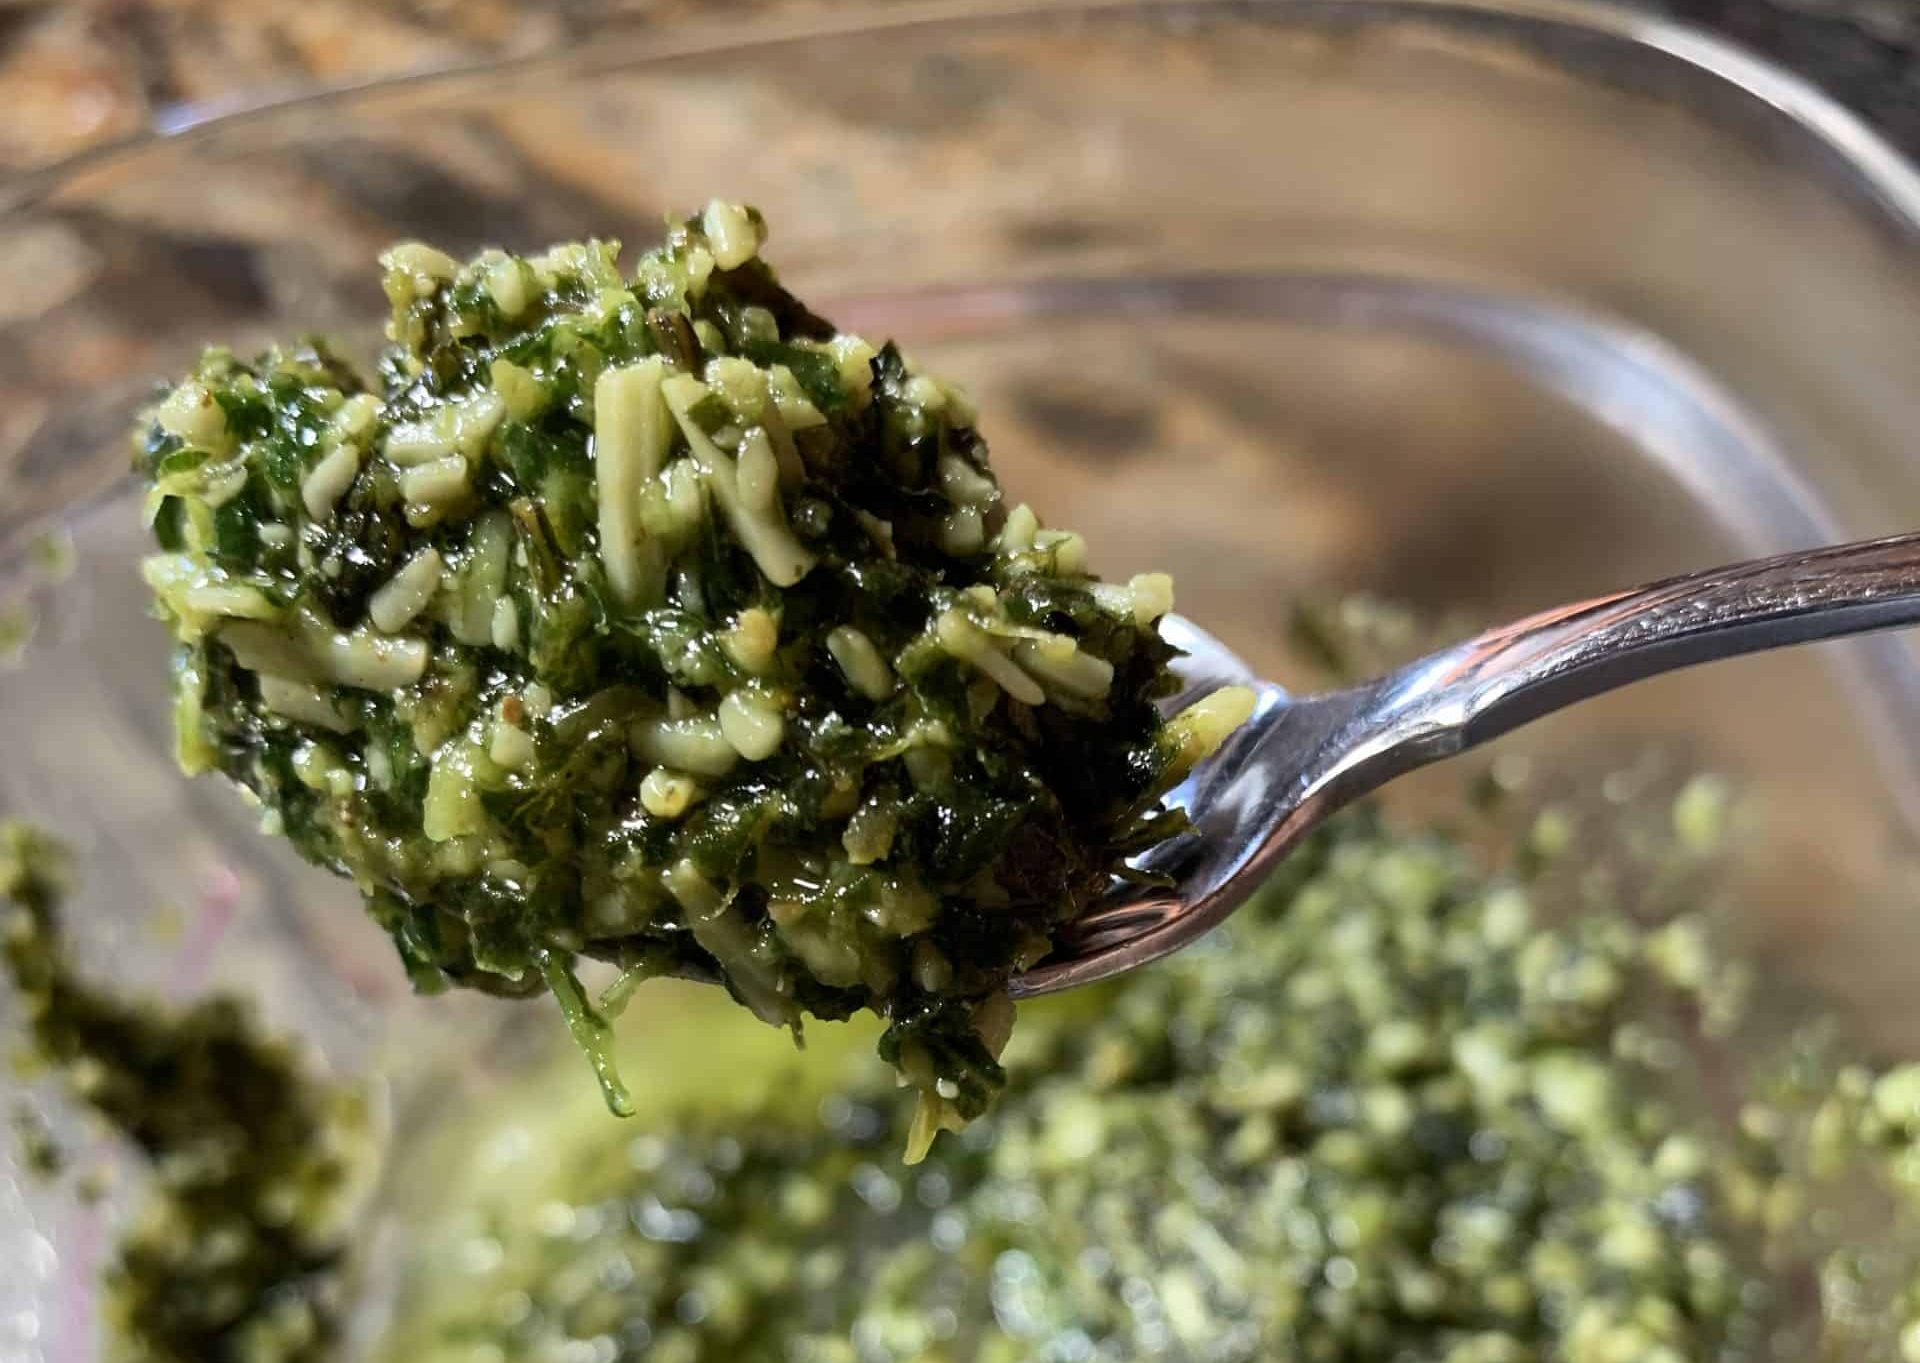 Pesto Recipe When You Have Lots of Basil